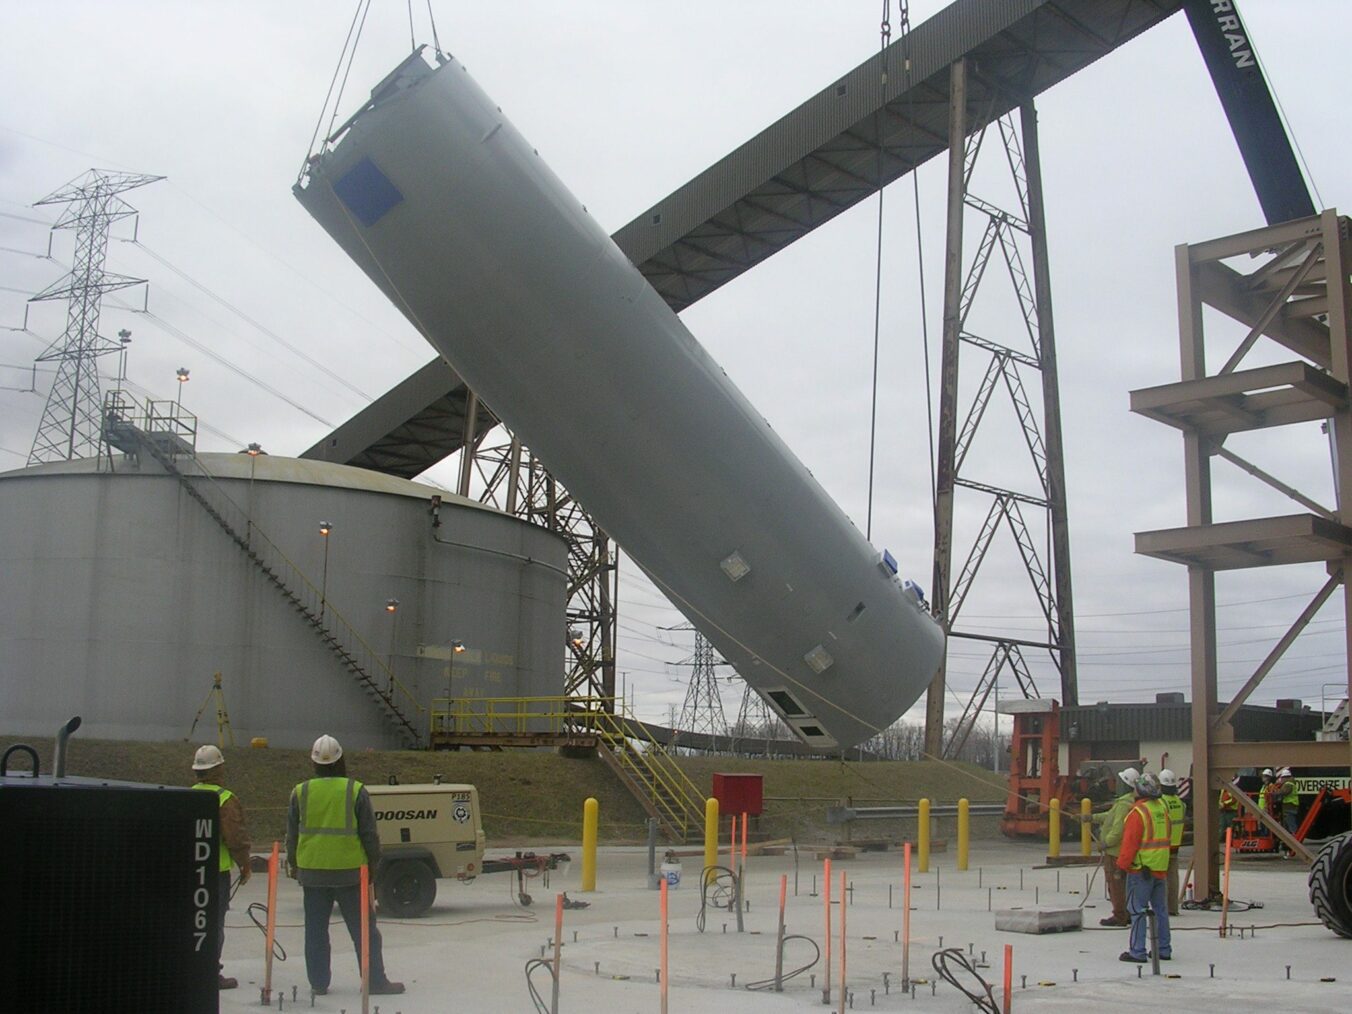 Construction workers surveying a silo being set by crane